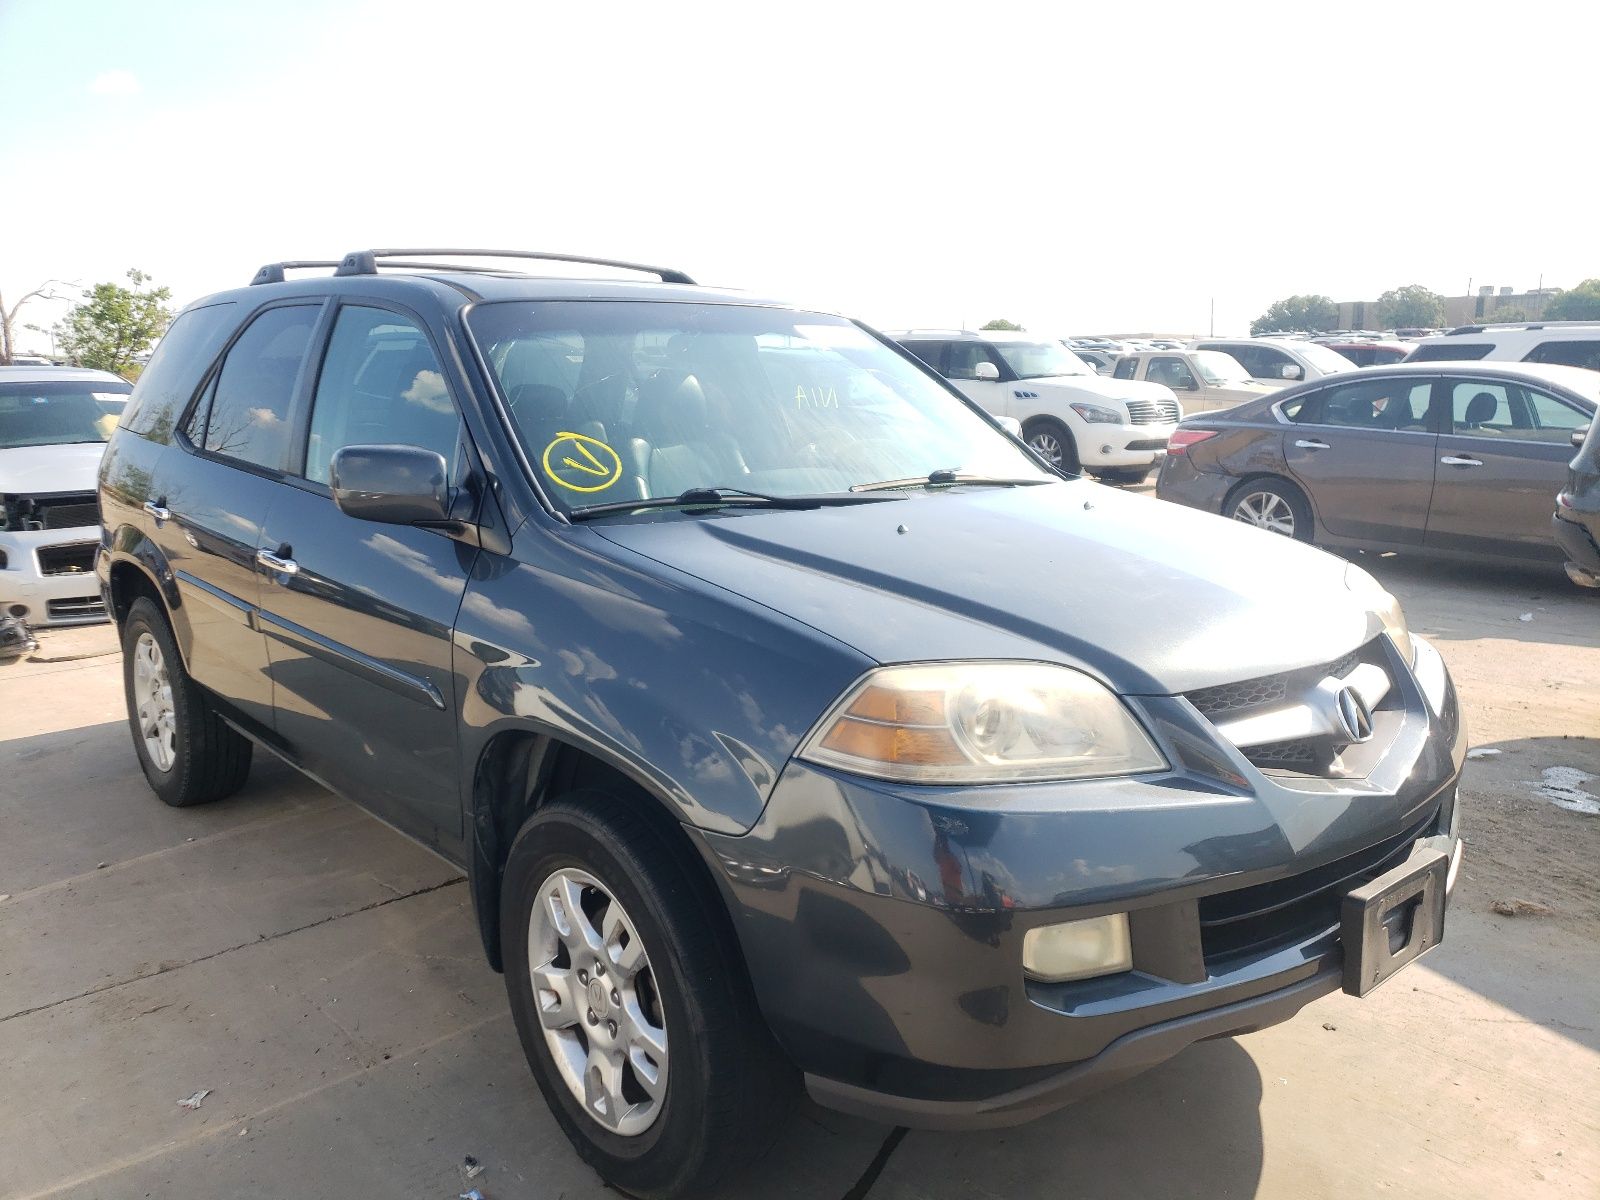 1 of 2HNYD18685H553241 Acura MDX 2005